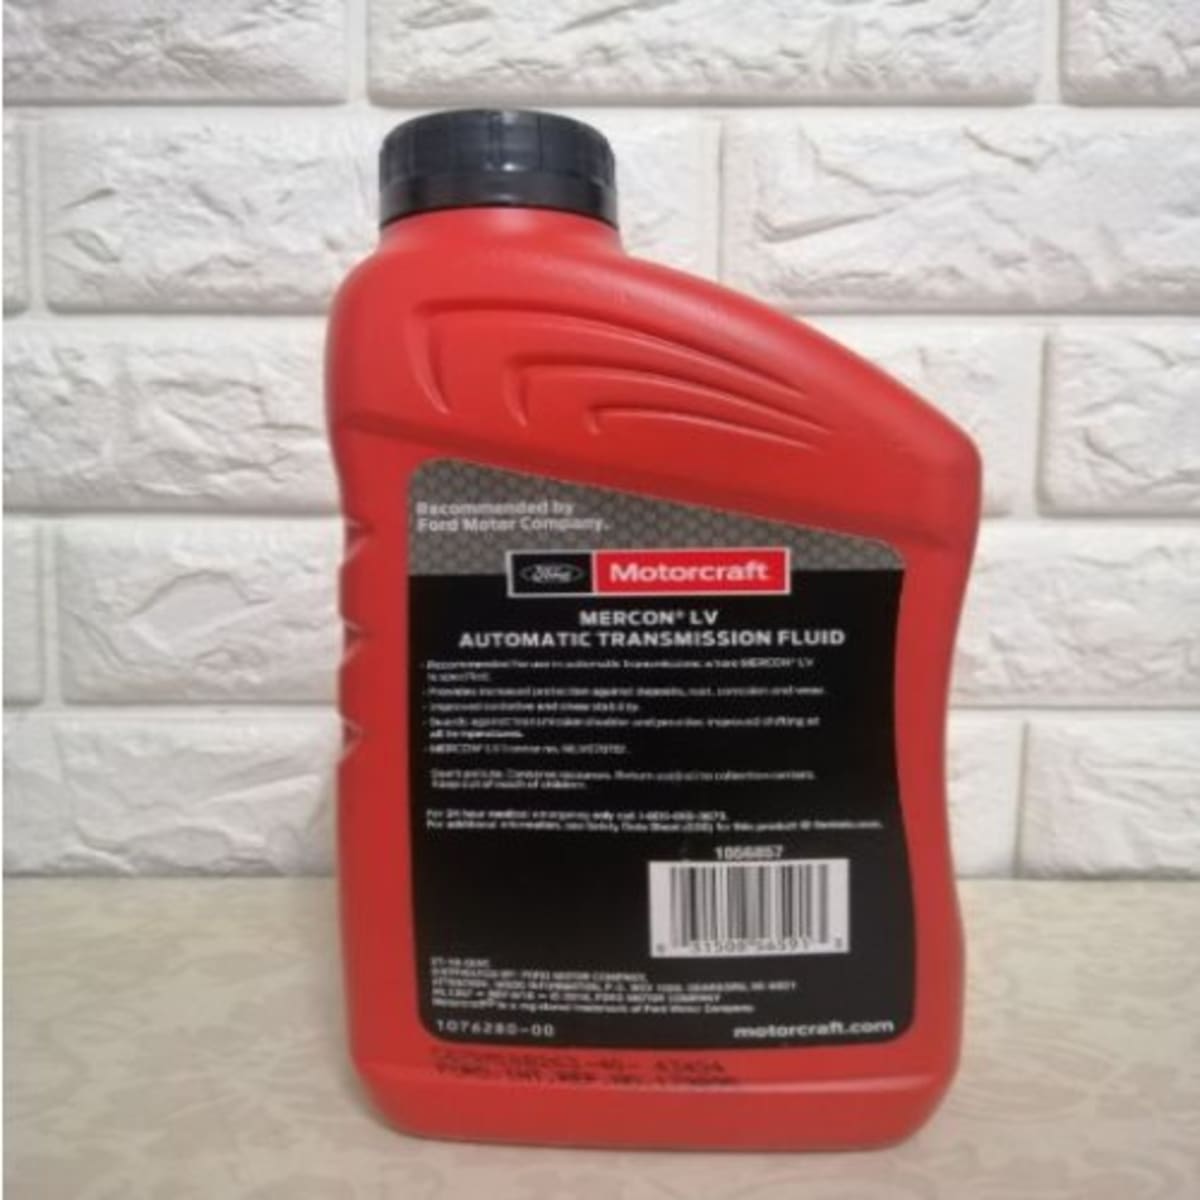 ford mercon lv automatic transmission fluid